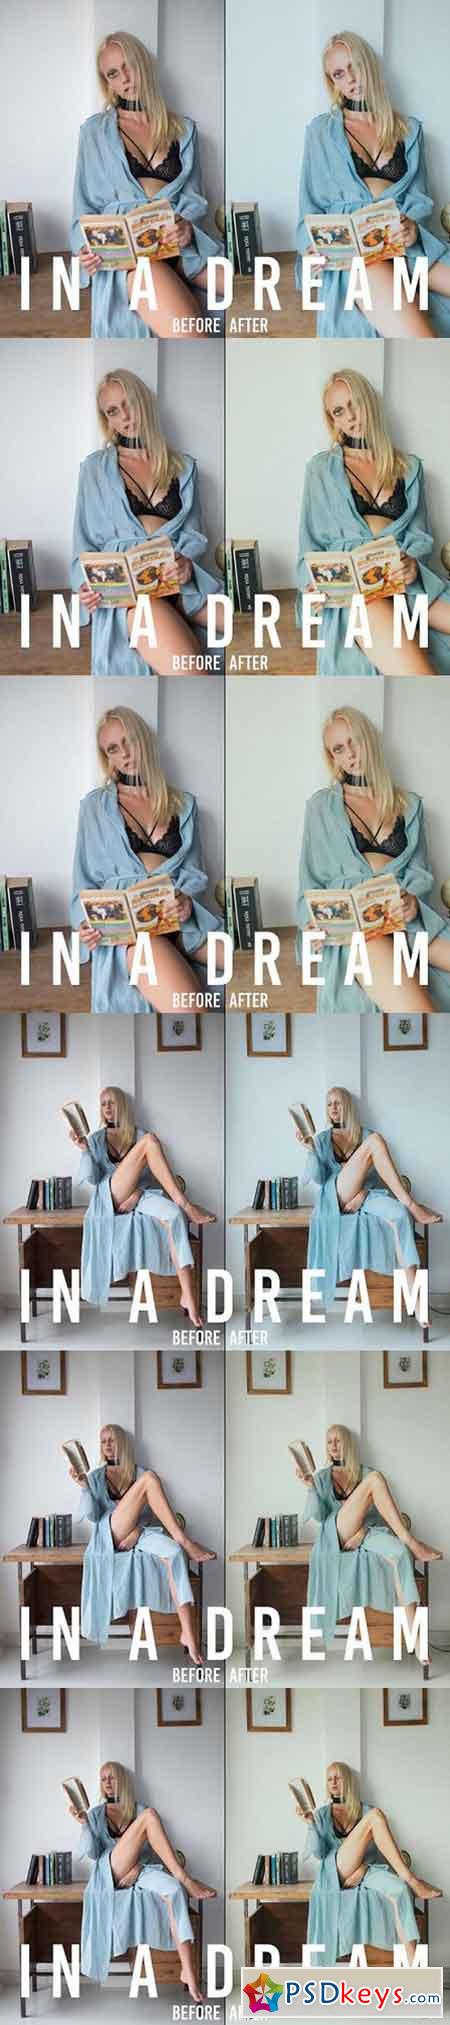 In A Dream Lifestyle LR Presets 1654133